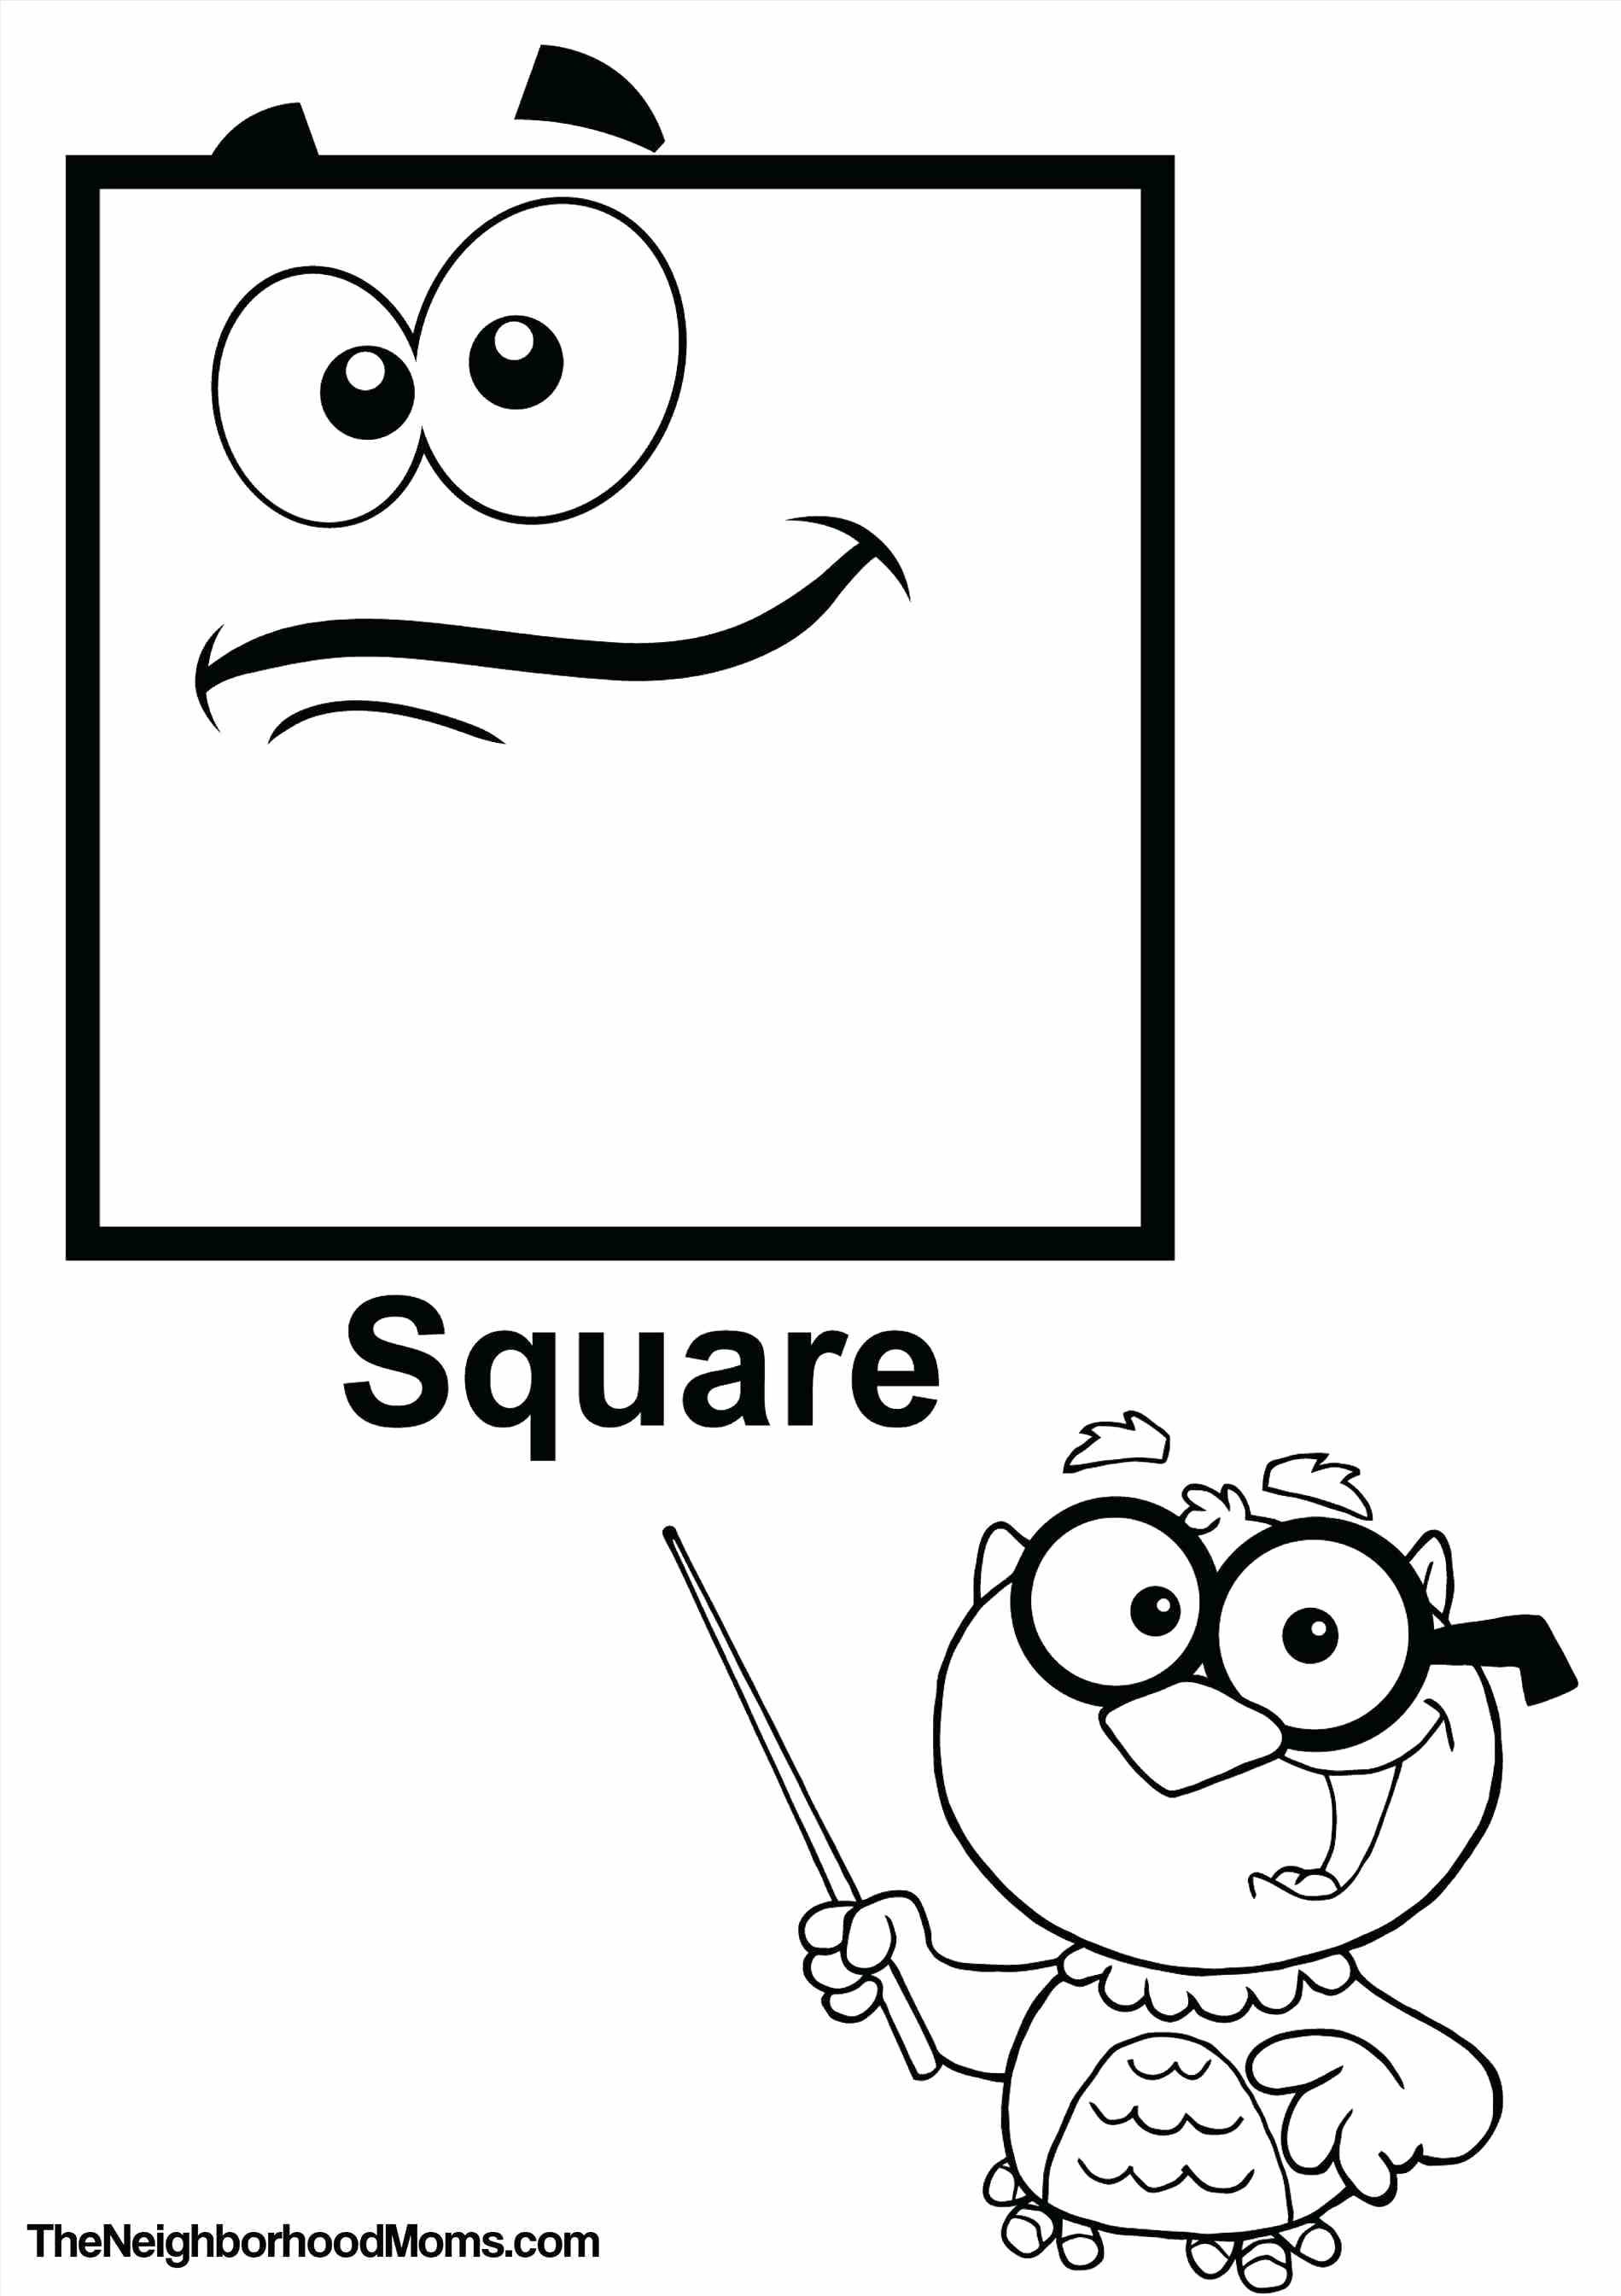 square-coloring-pages-for-preschool-at-getcolorings-free-printable-colorings-pages-to